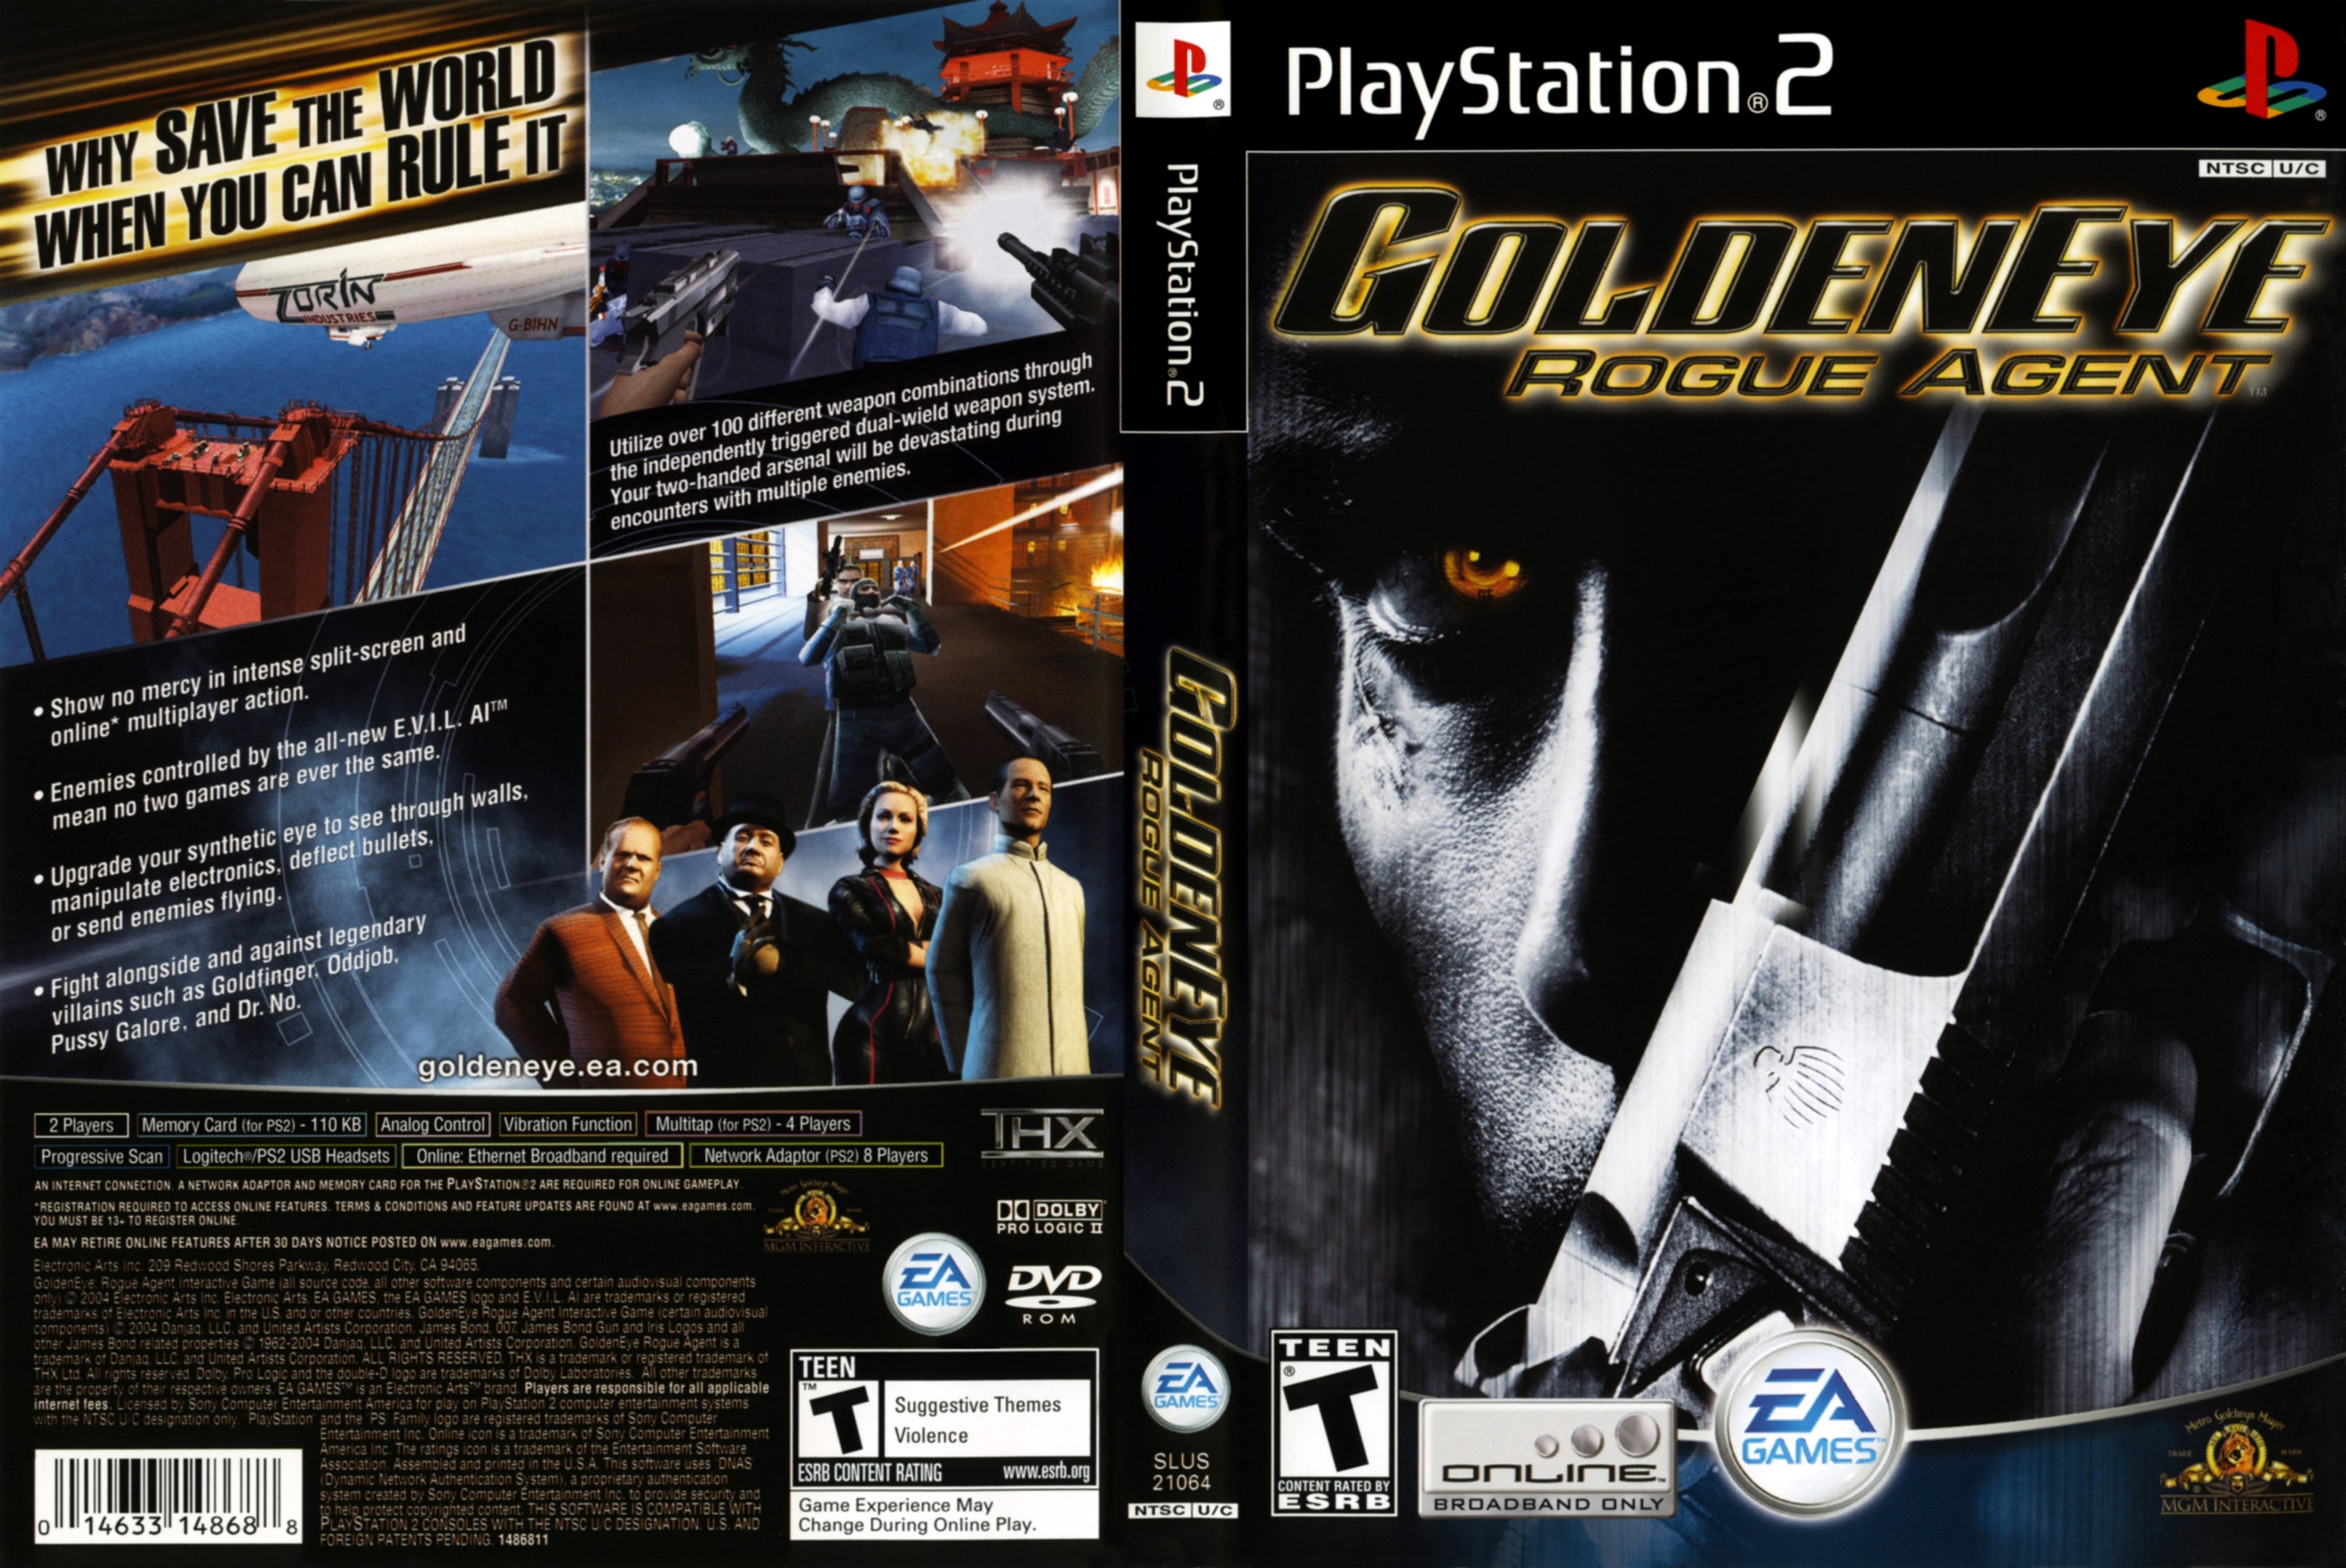 Ps2 - 007 Goldeneye Rogue Agent Sony PlayStation 2 Complete #111